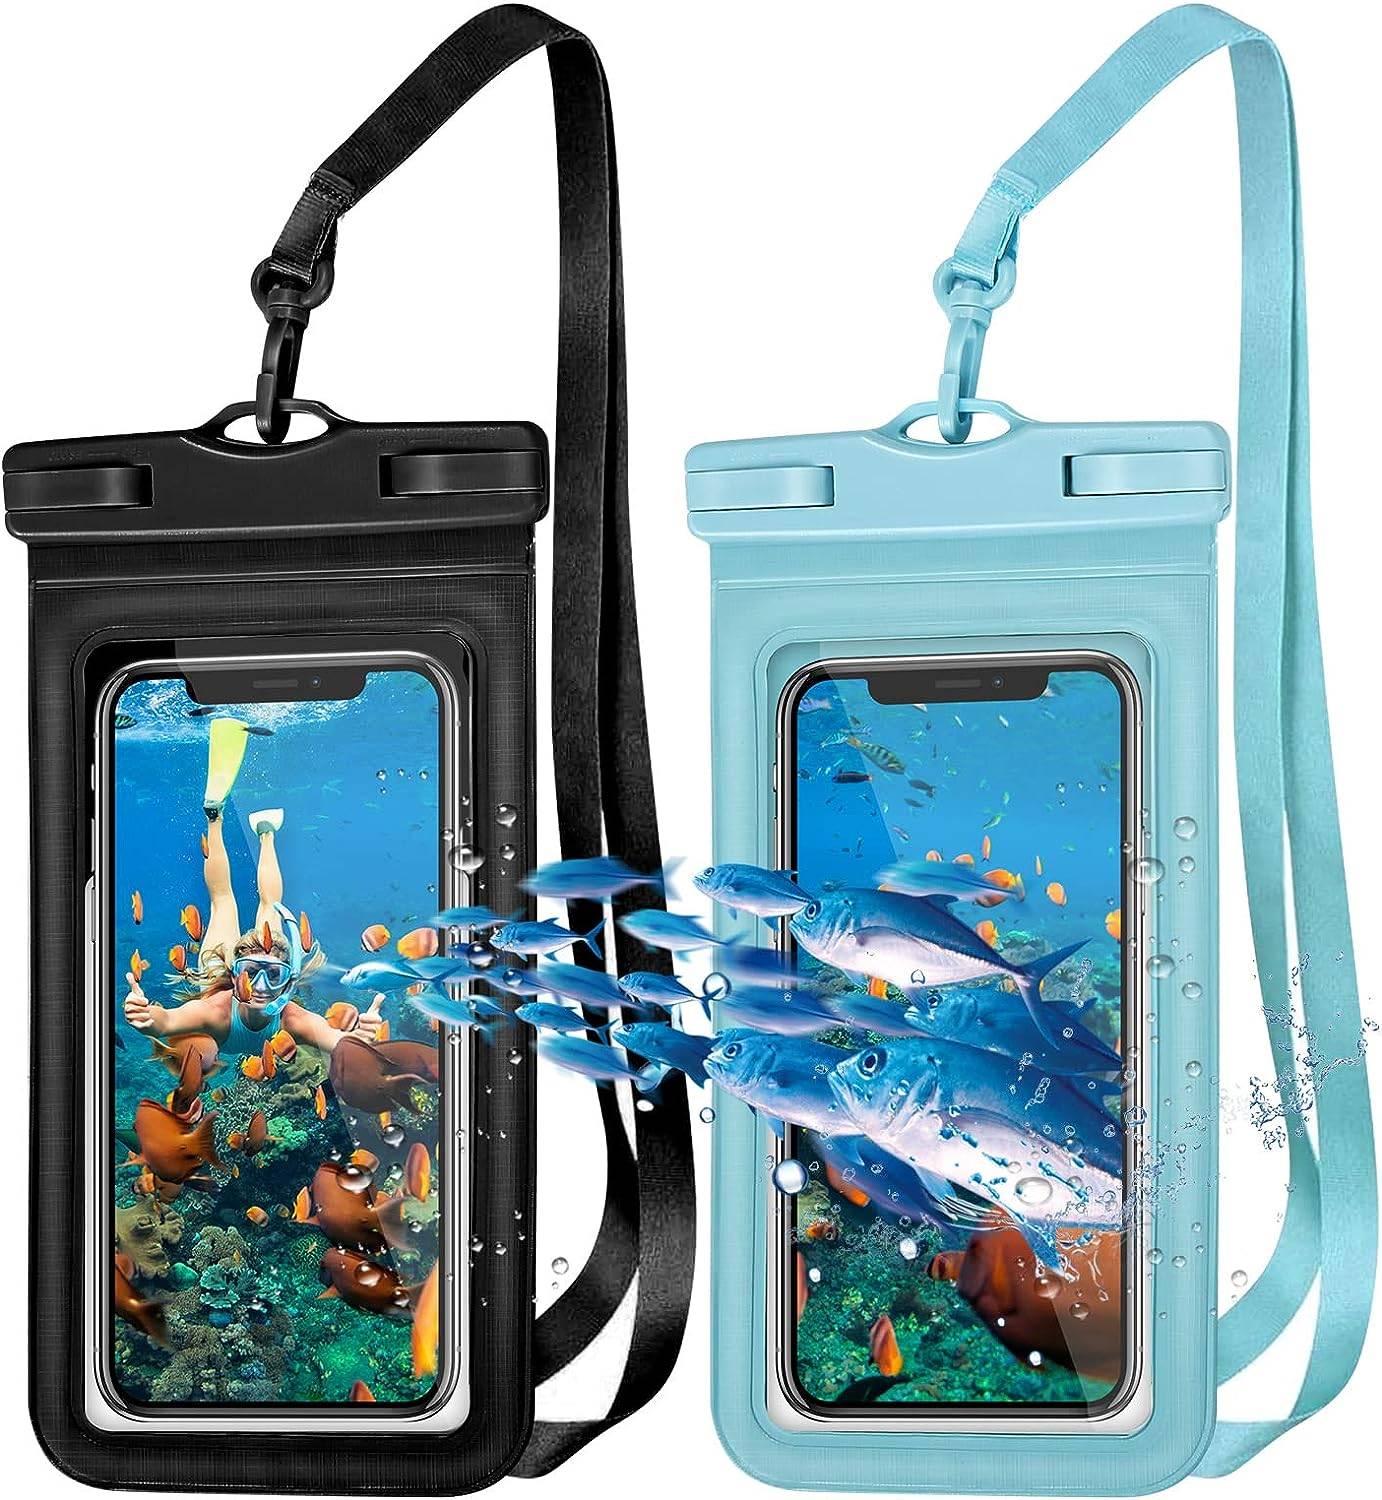 Use your smartphone on the lake with confidence with the waterproof phone case. Whether you like to hike, go boating, or just want to make sure your phone stays dry, this waterproof phone case is the best option for protecting your device. This waterproof case measures 4.5 inches wide by 8.5 inches tall. It is compatible with multiple devices of different sizes, both iPhone and Android. Great for camping trips, hiking trails, beaches, festivals and adventures! Waterproof phone case will also protect your mobile device from scratches! This is 100% waterproof and its transparent case allows you to work on your phone while the phone stays in this case, protected.